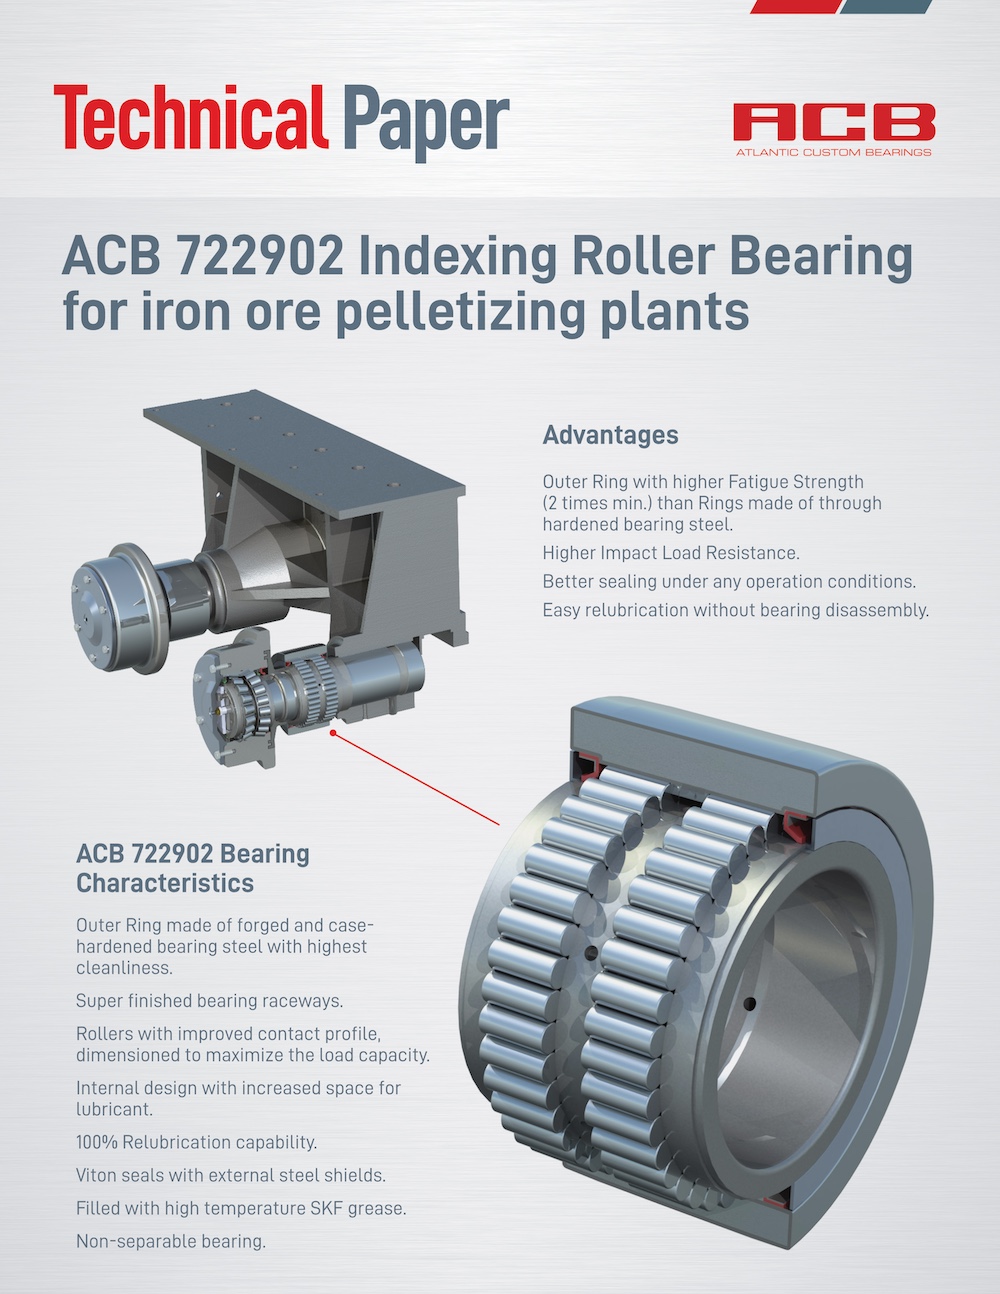 ACB 722902 Indexing Roller Bearing for steel industry.jpg